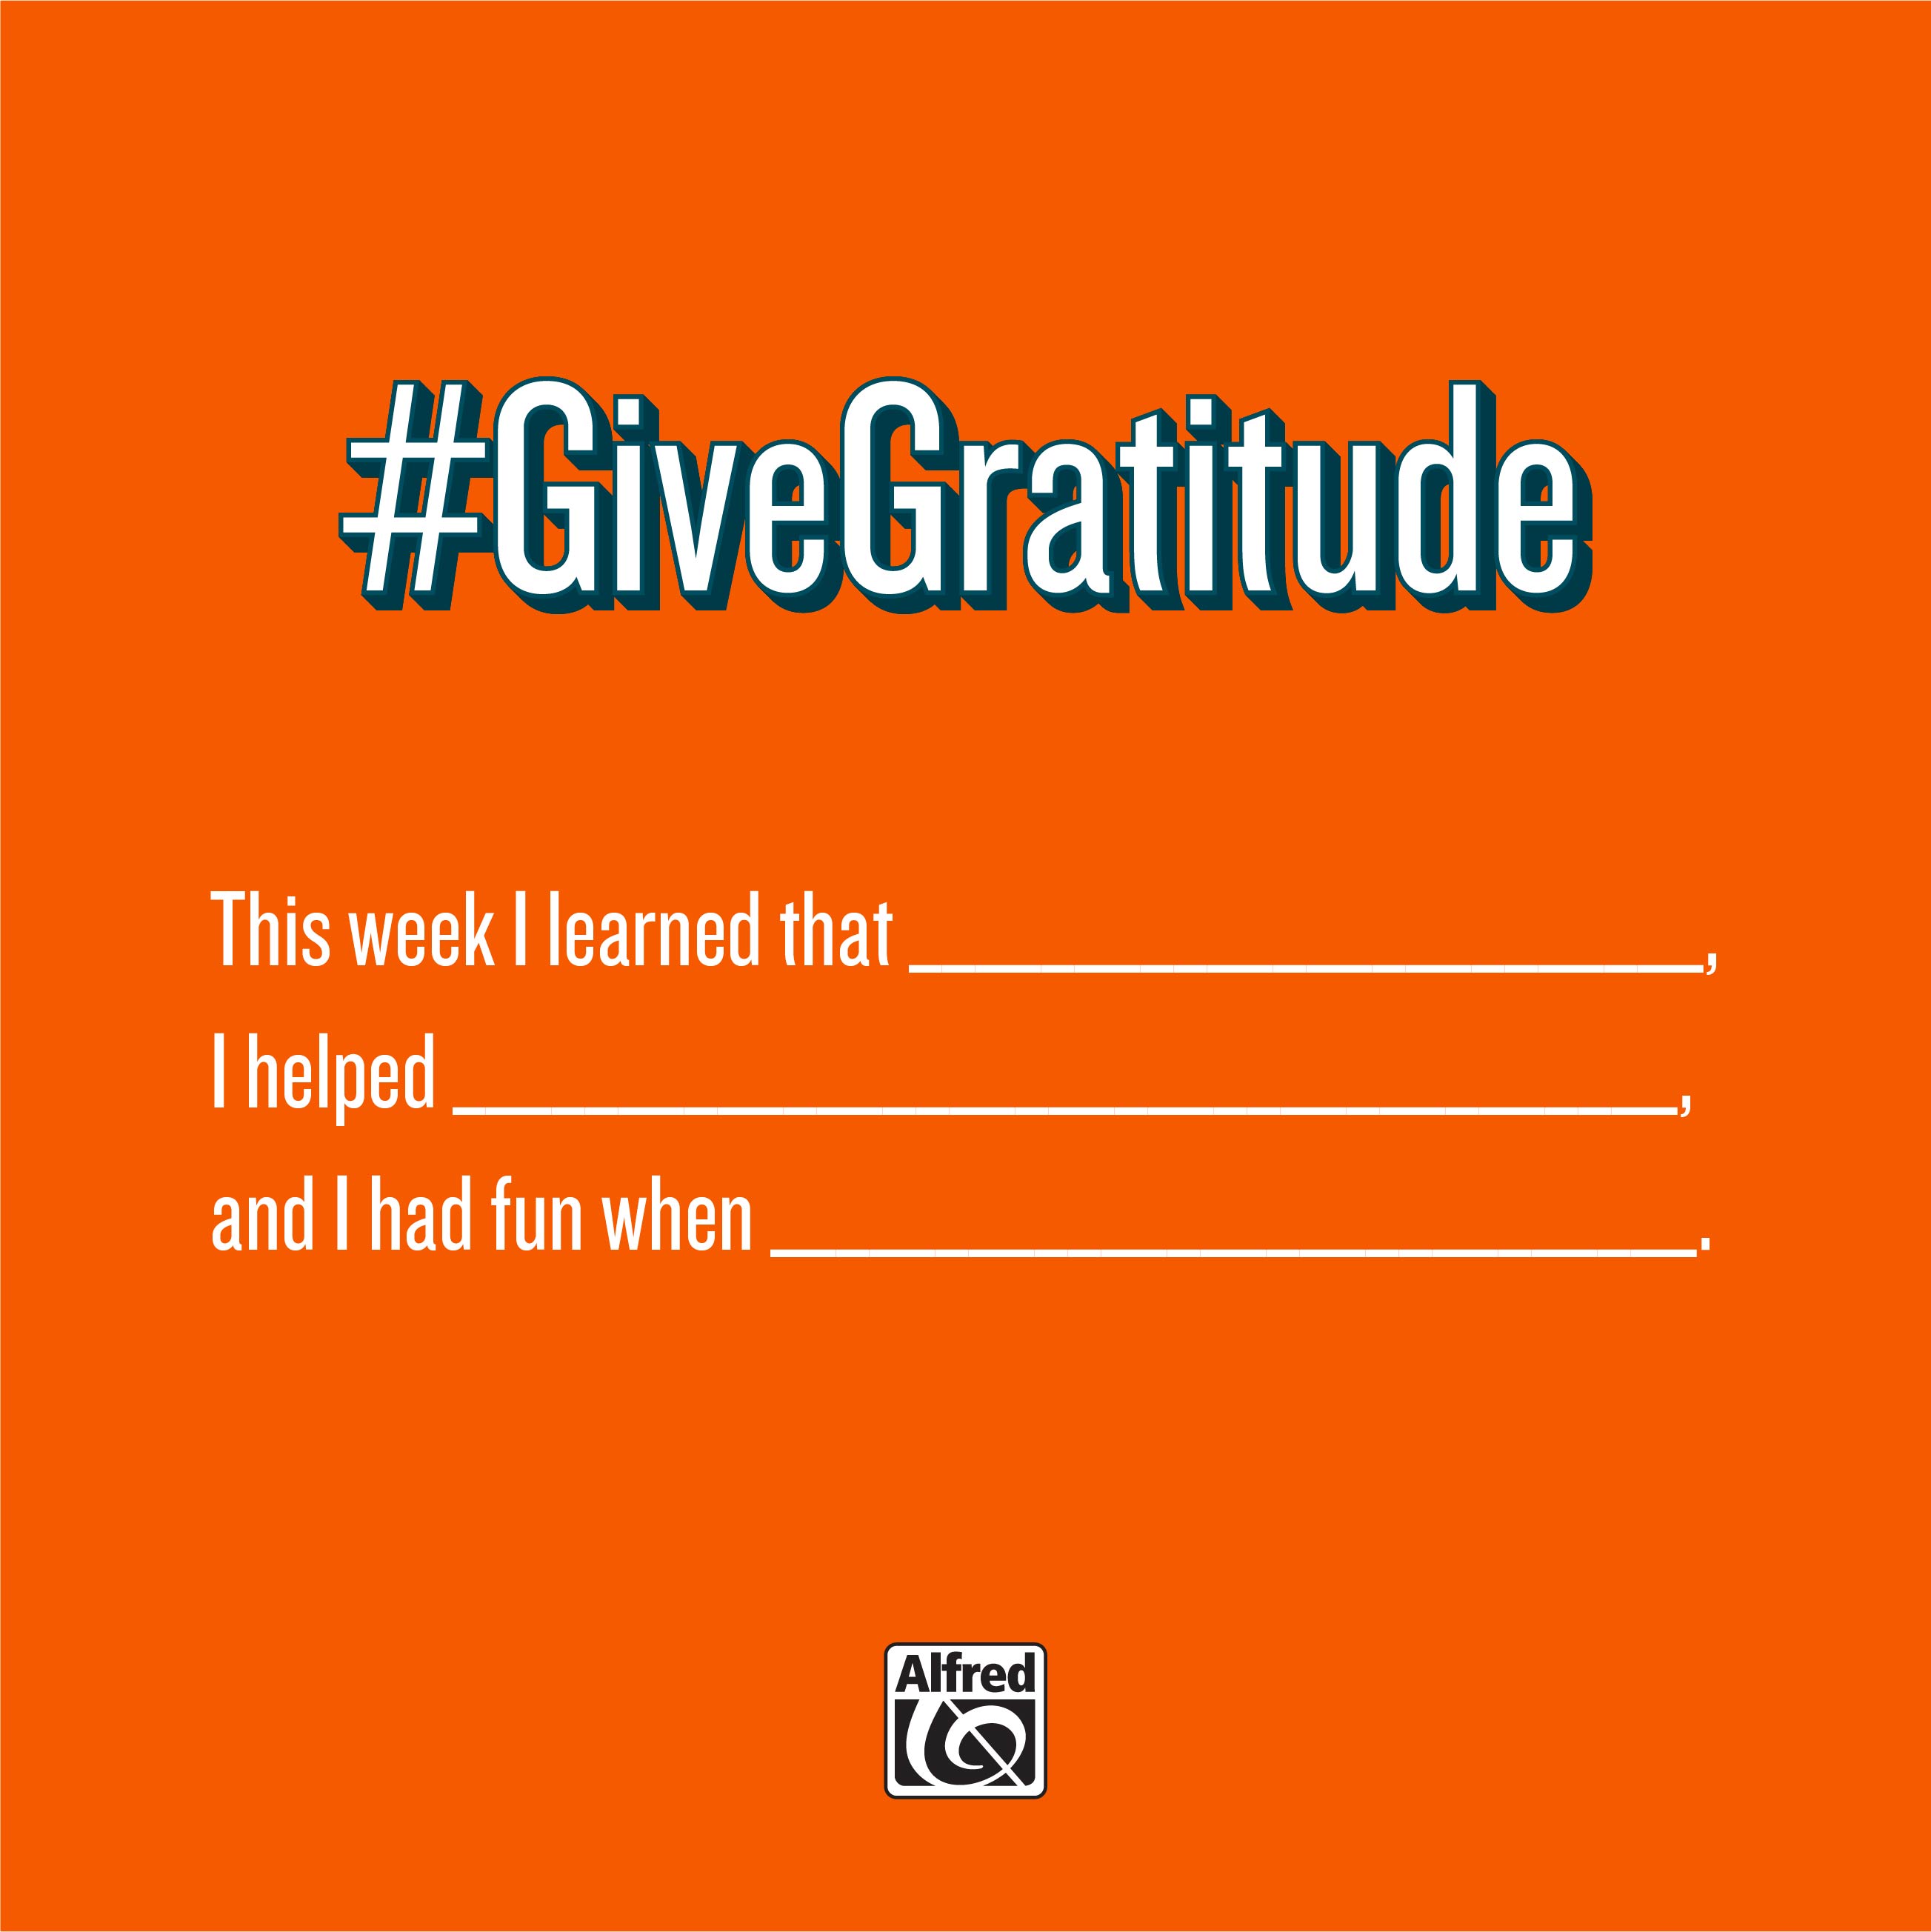 Give Thanks! Free Gratitude Journal Activity for Students and Teachers